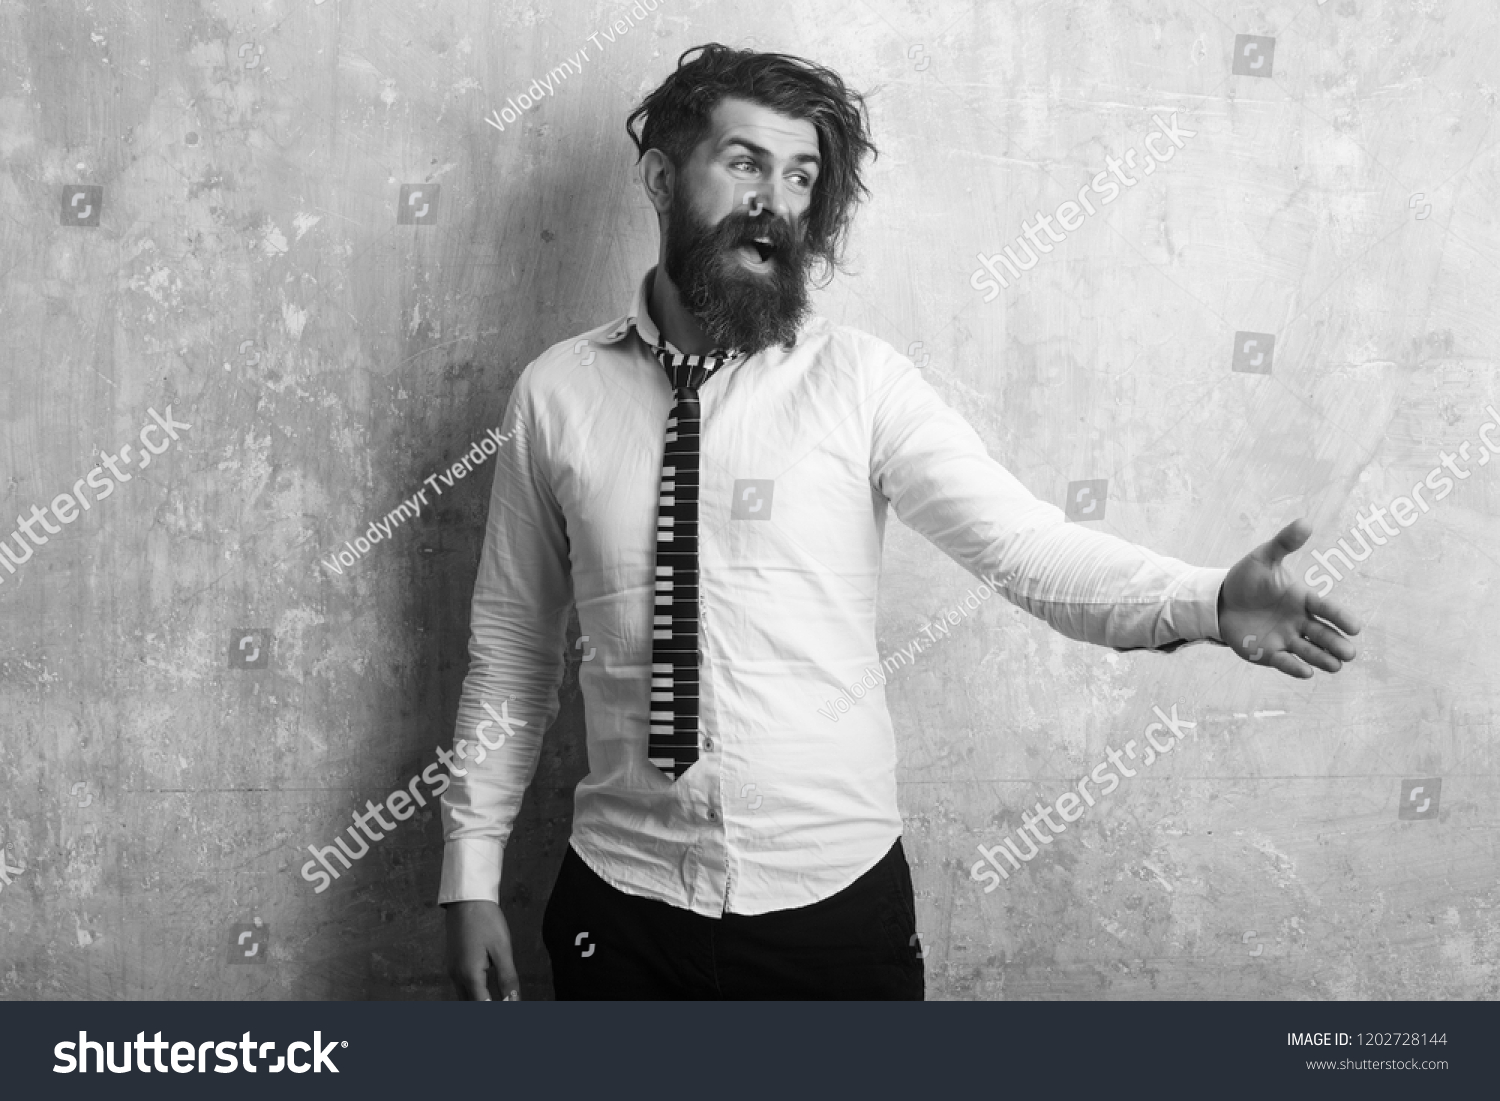 Business fashion and beauty. Guy hold hand for handshake. Man with long beard and mustache on happy face. Fashion model with stylish hair on textured wall background Hipster in shirt and musical tie. #1202728144